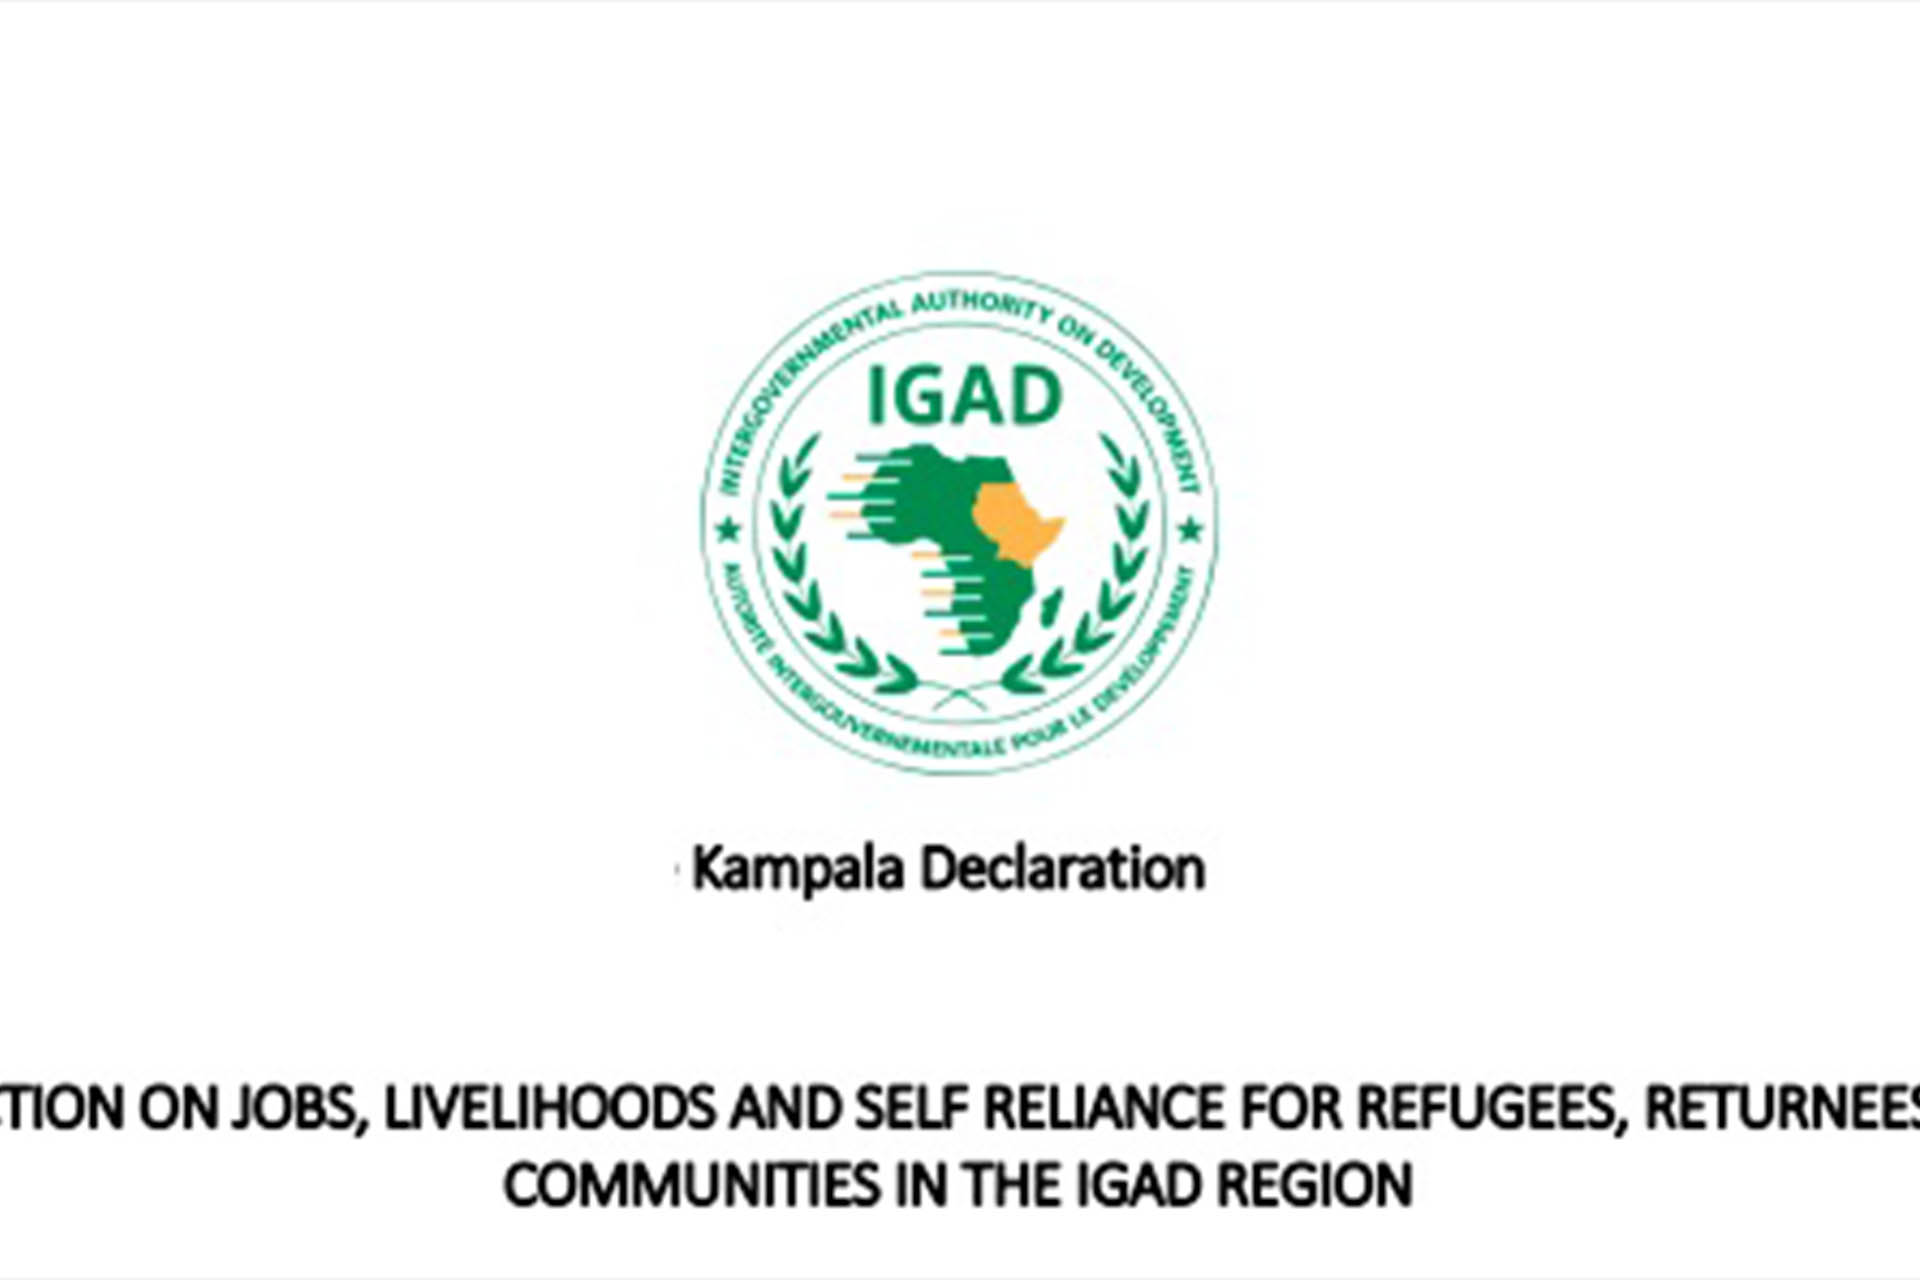 Towards Refugees’ Self-Reliance and Inclusion: IGAD Holds its 1st Regional Expert Meeting on the Kampala Declaration